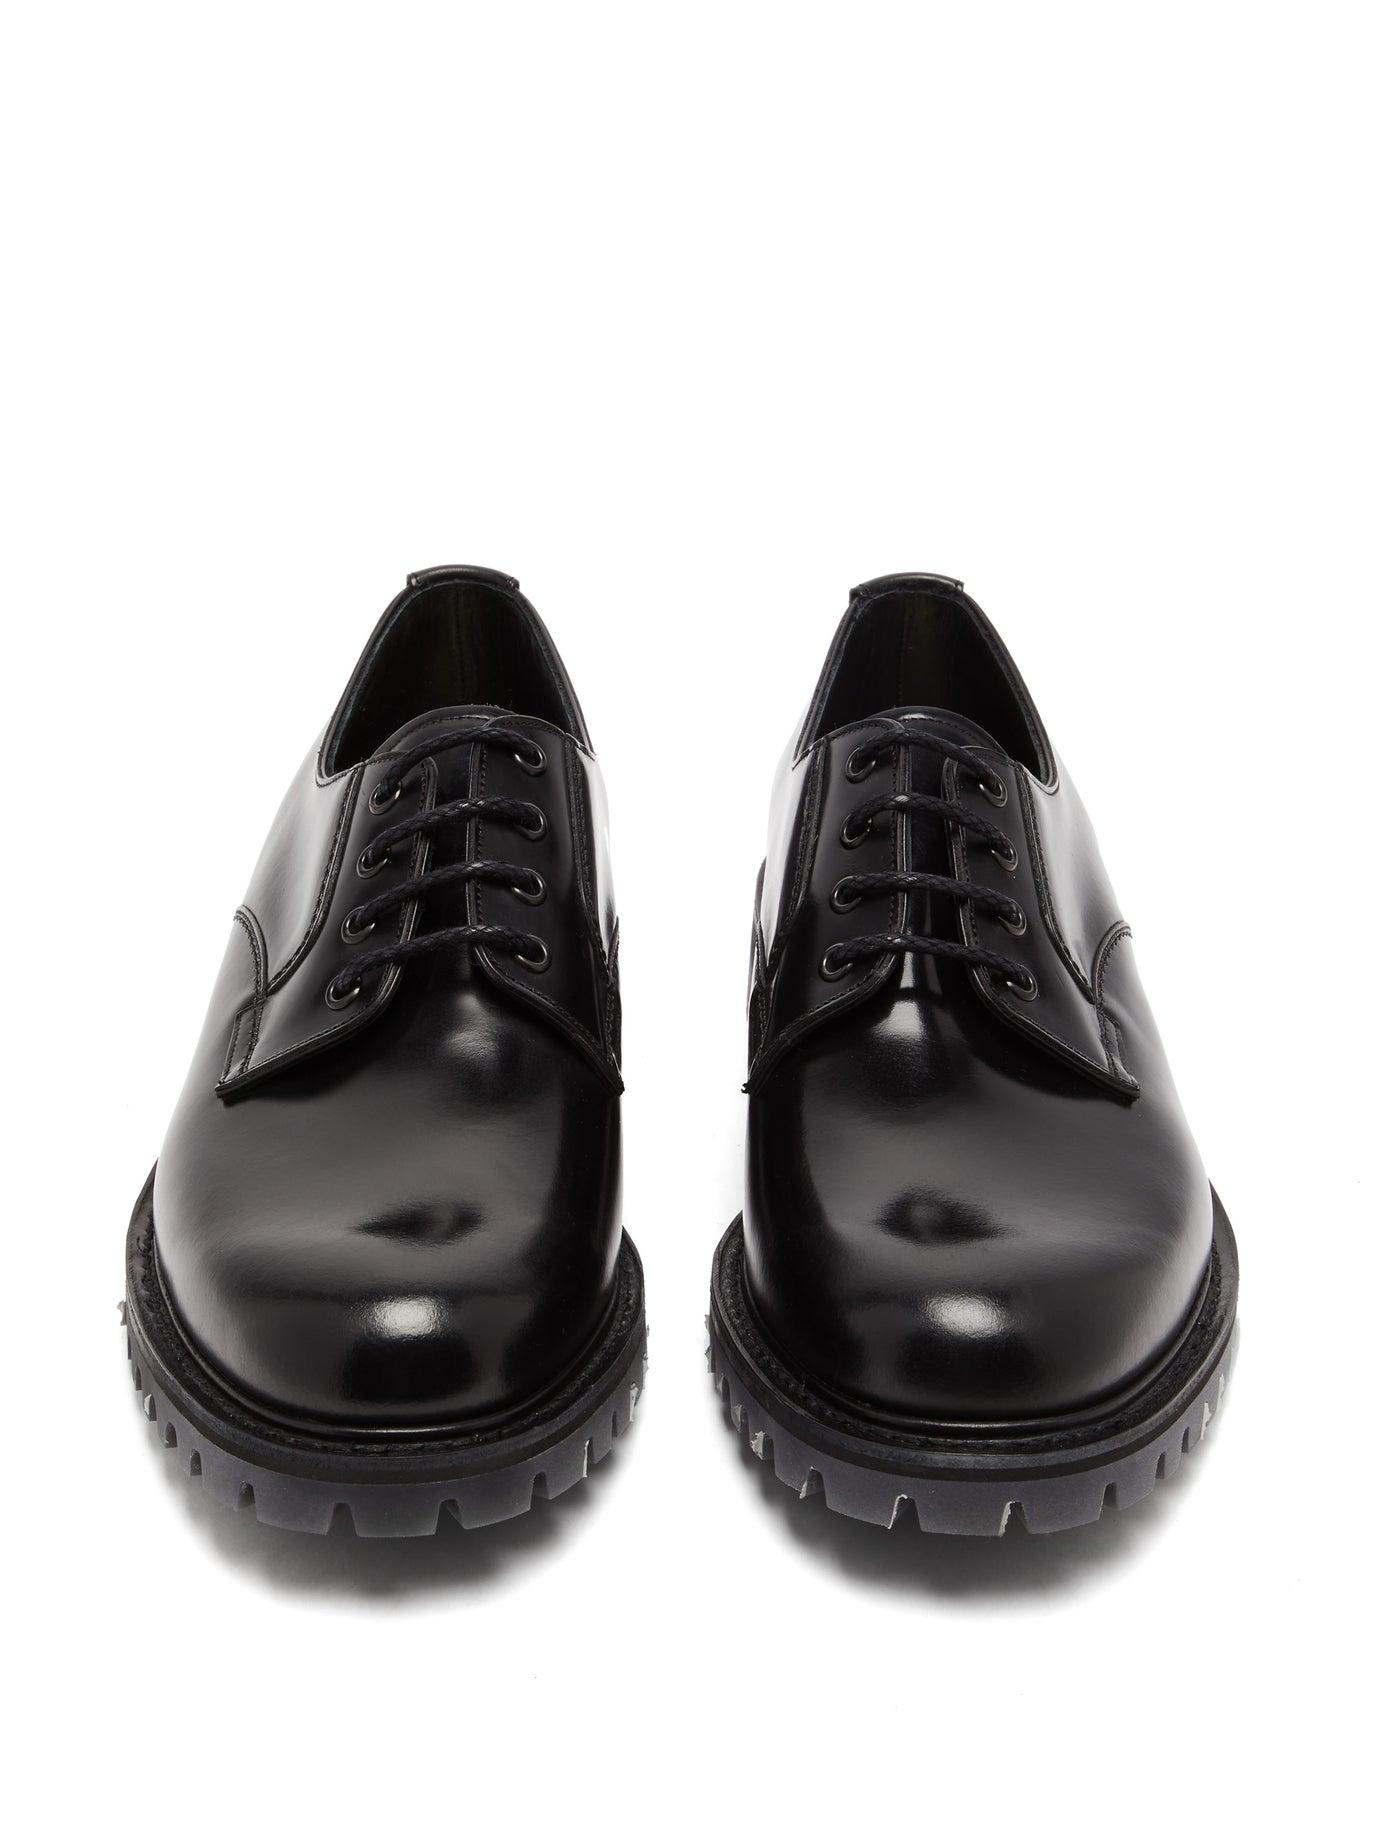 Church's Chester Chunky-sole Leather Derby Shoes in Black for Men - Lyst